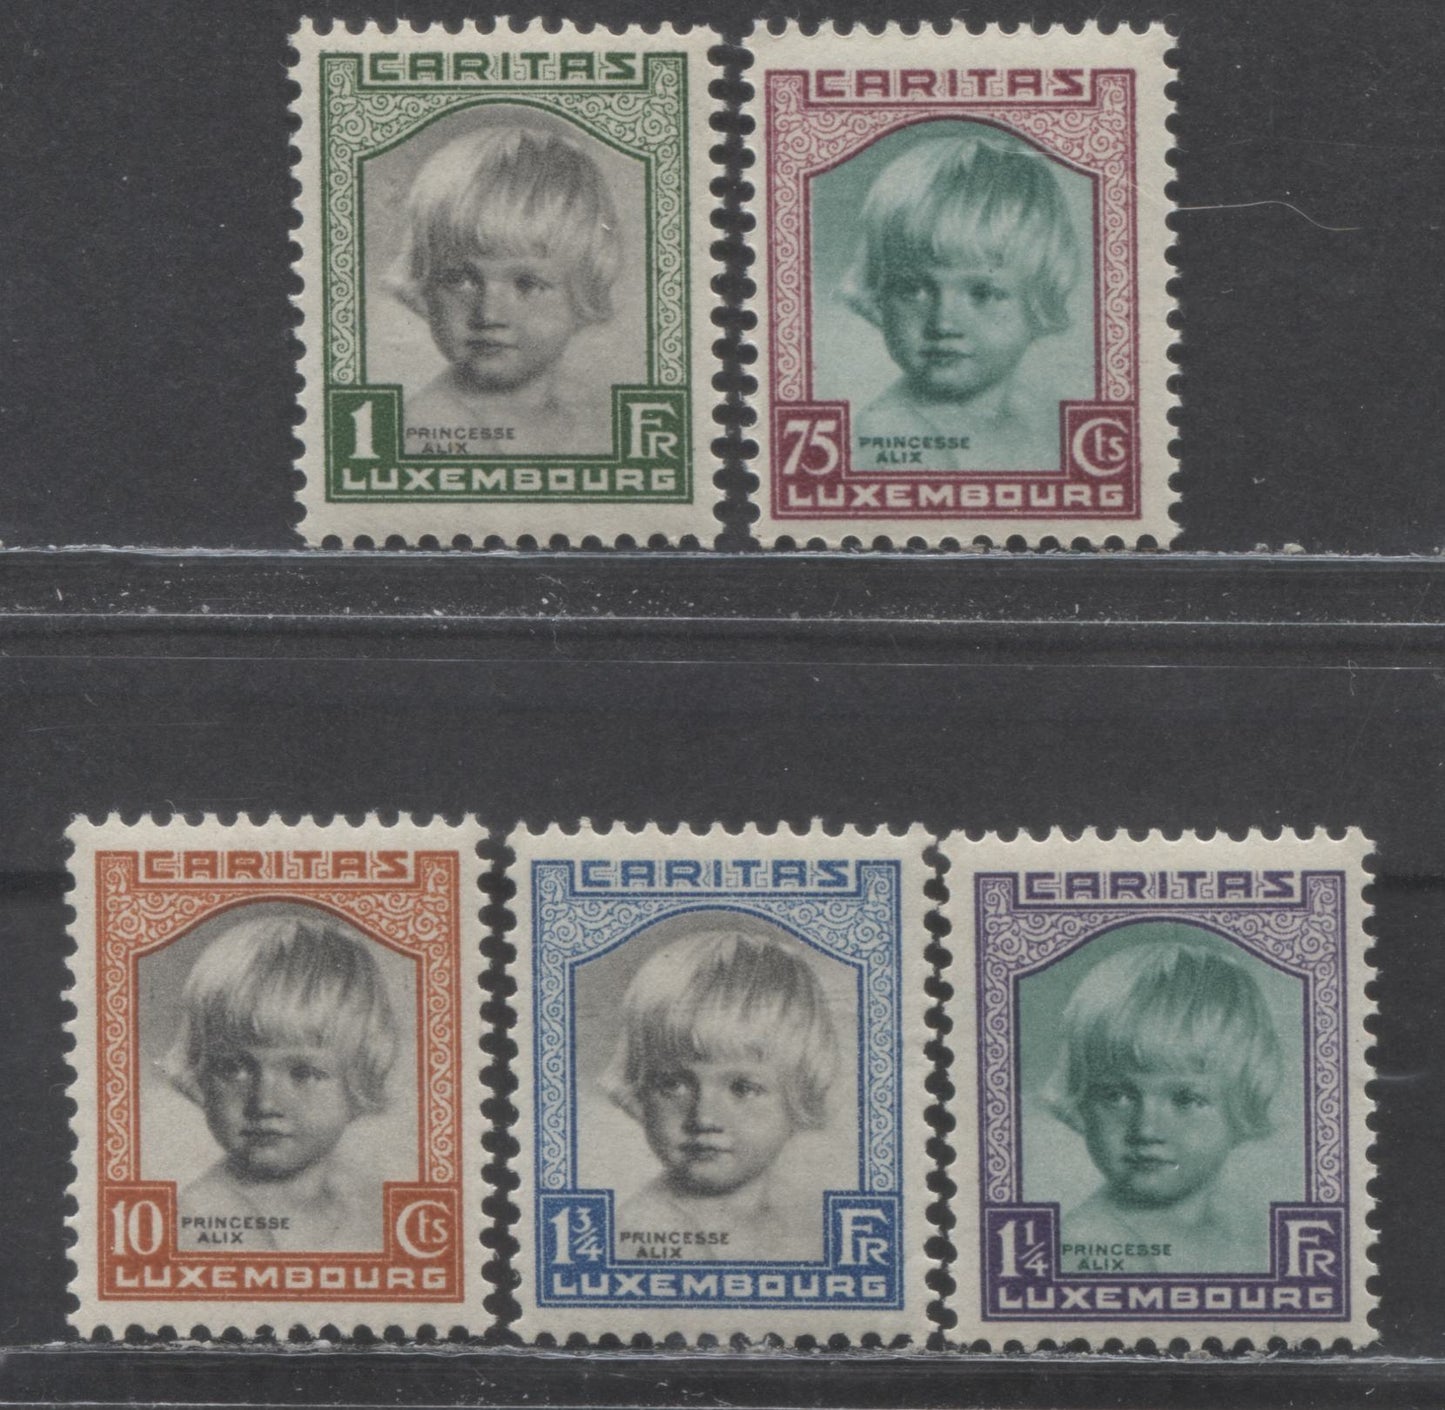 Lot 460 Luxembourg SC#B45-B49 1931 Princess Alix Semi Postals, 5 F/VFNH Singles, Click on Listing to See ALL Pictures, 2022 Scott Classic Cat. $85 USD